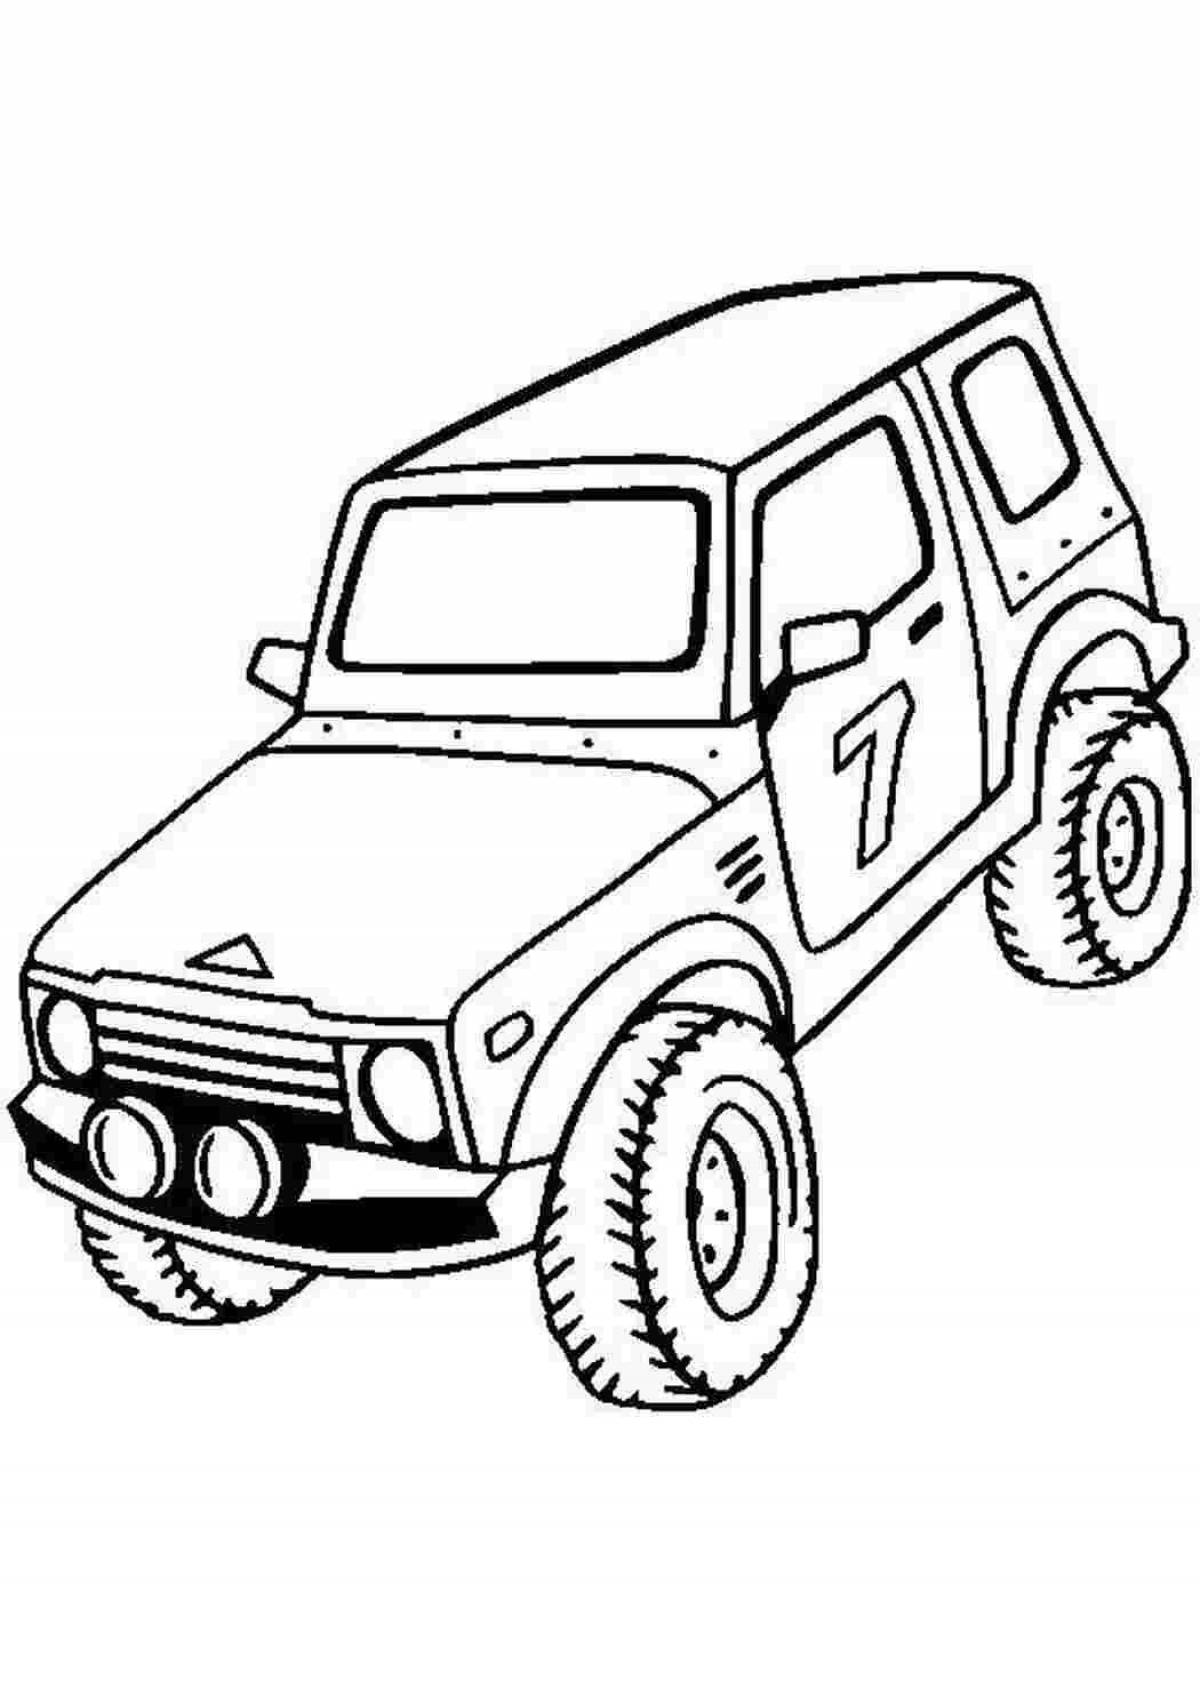 Jeep coloring book for kids 5-6 years old